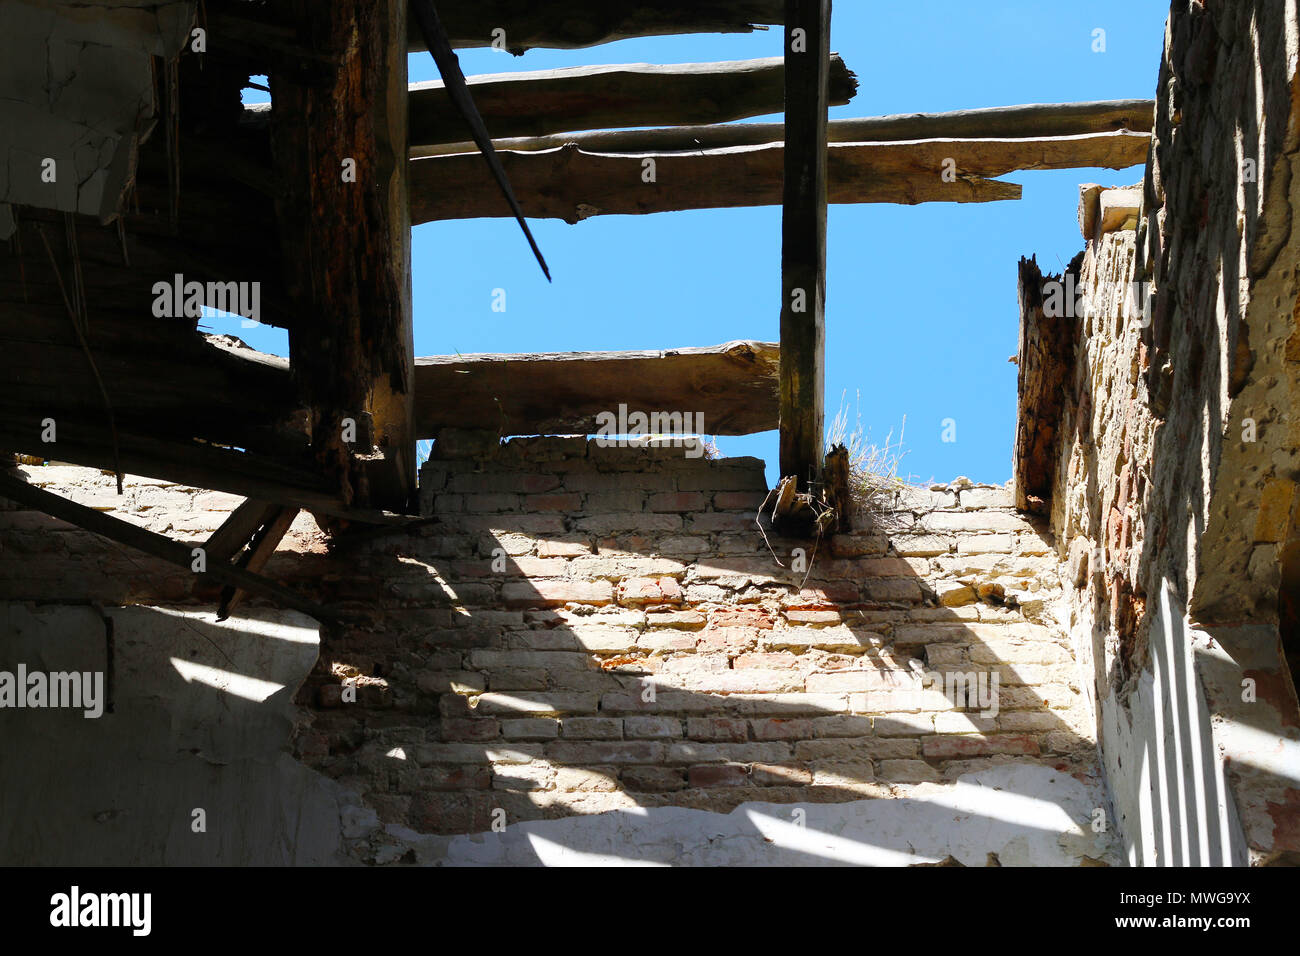 Destroyed ancient building. Collapsed ceiling in an old abandoned castle. Sunlight penetrating inside. Stock Photo